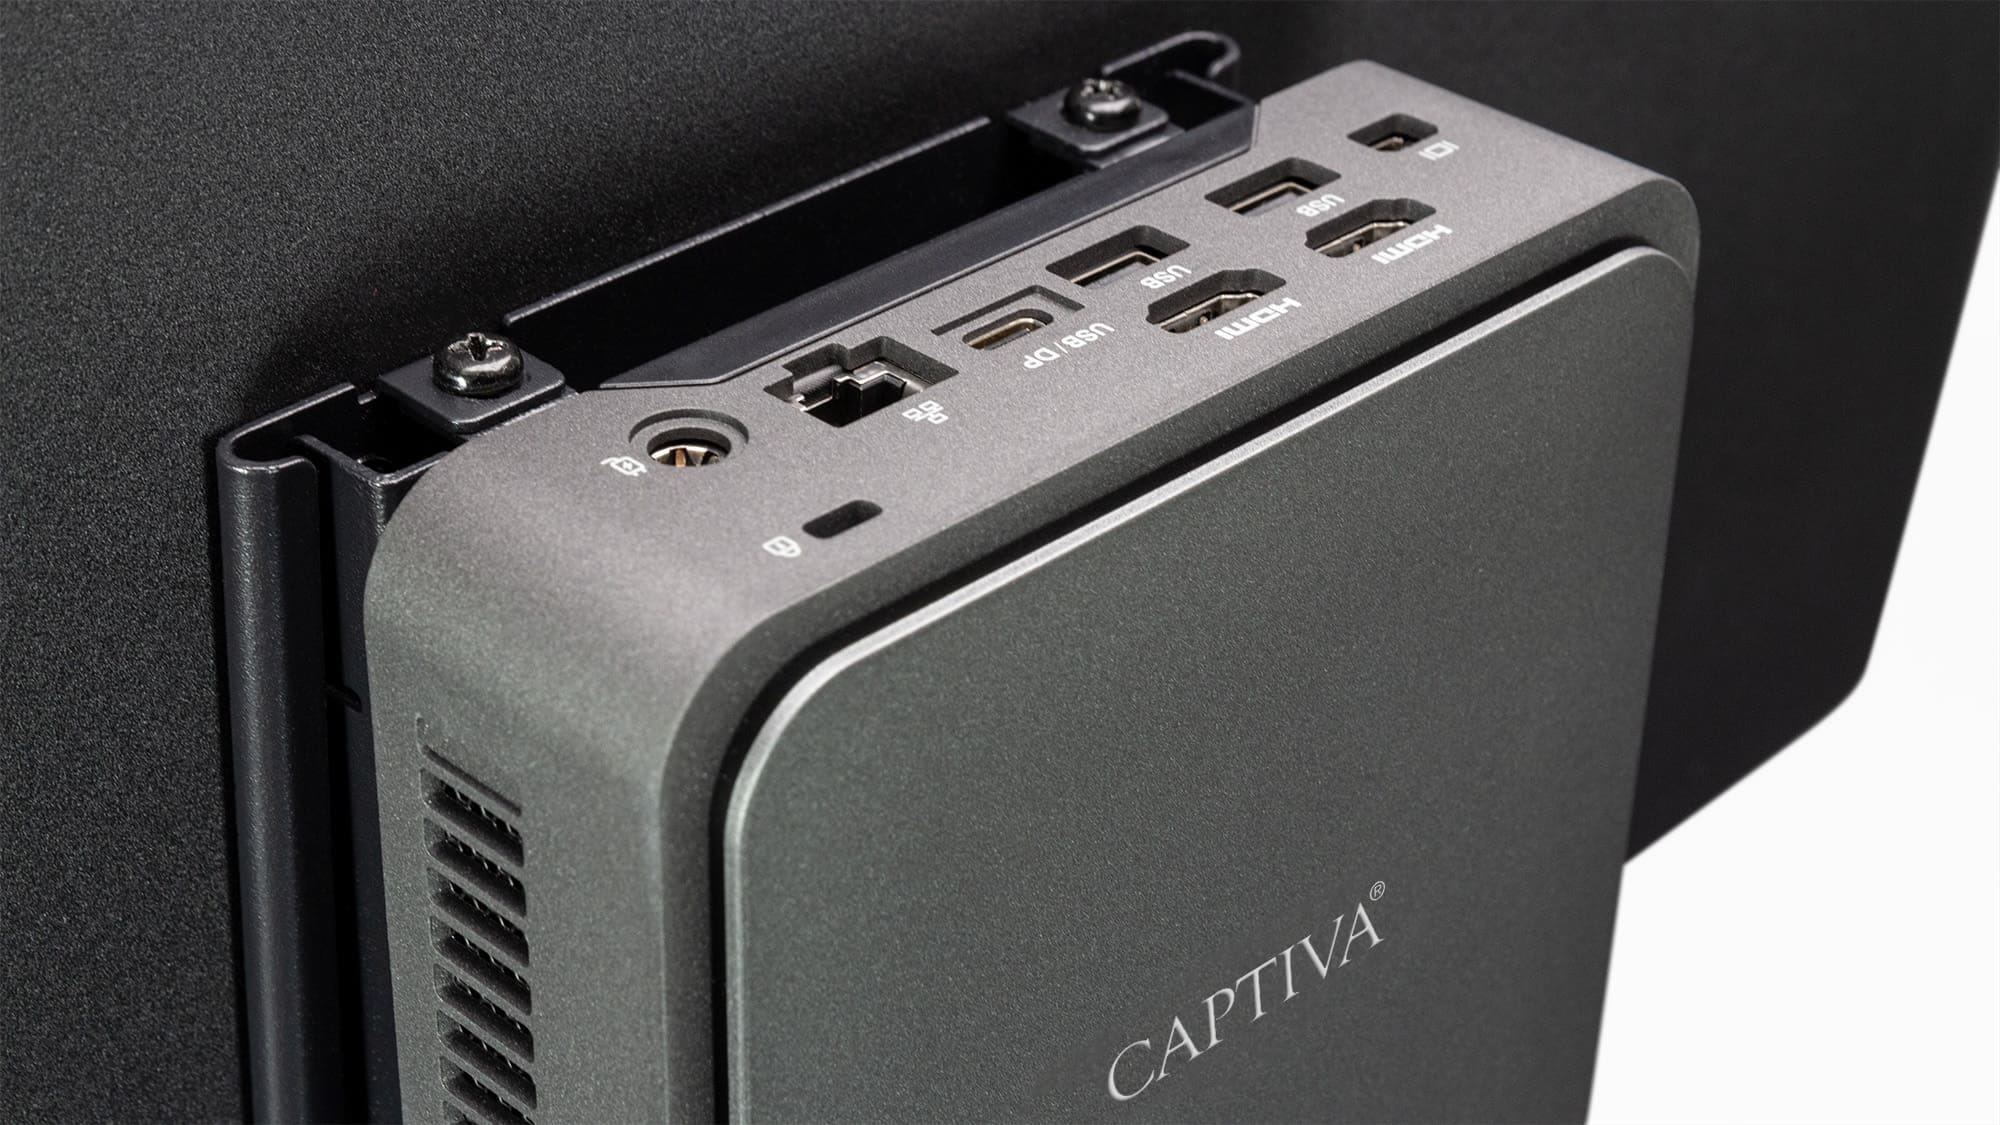 CAPTIVA All-in-One PC »All-In-One Power Starter I82-220«